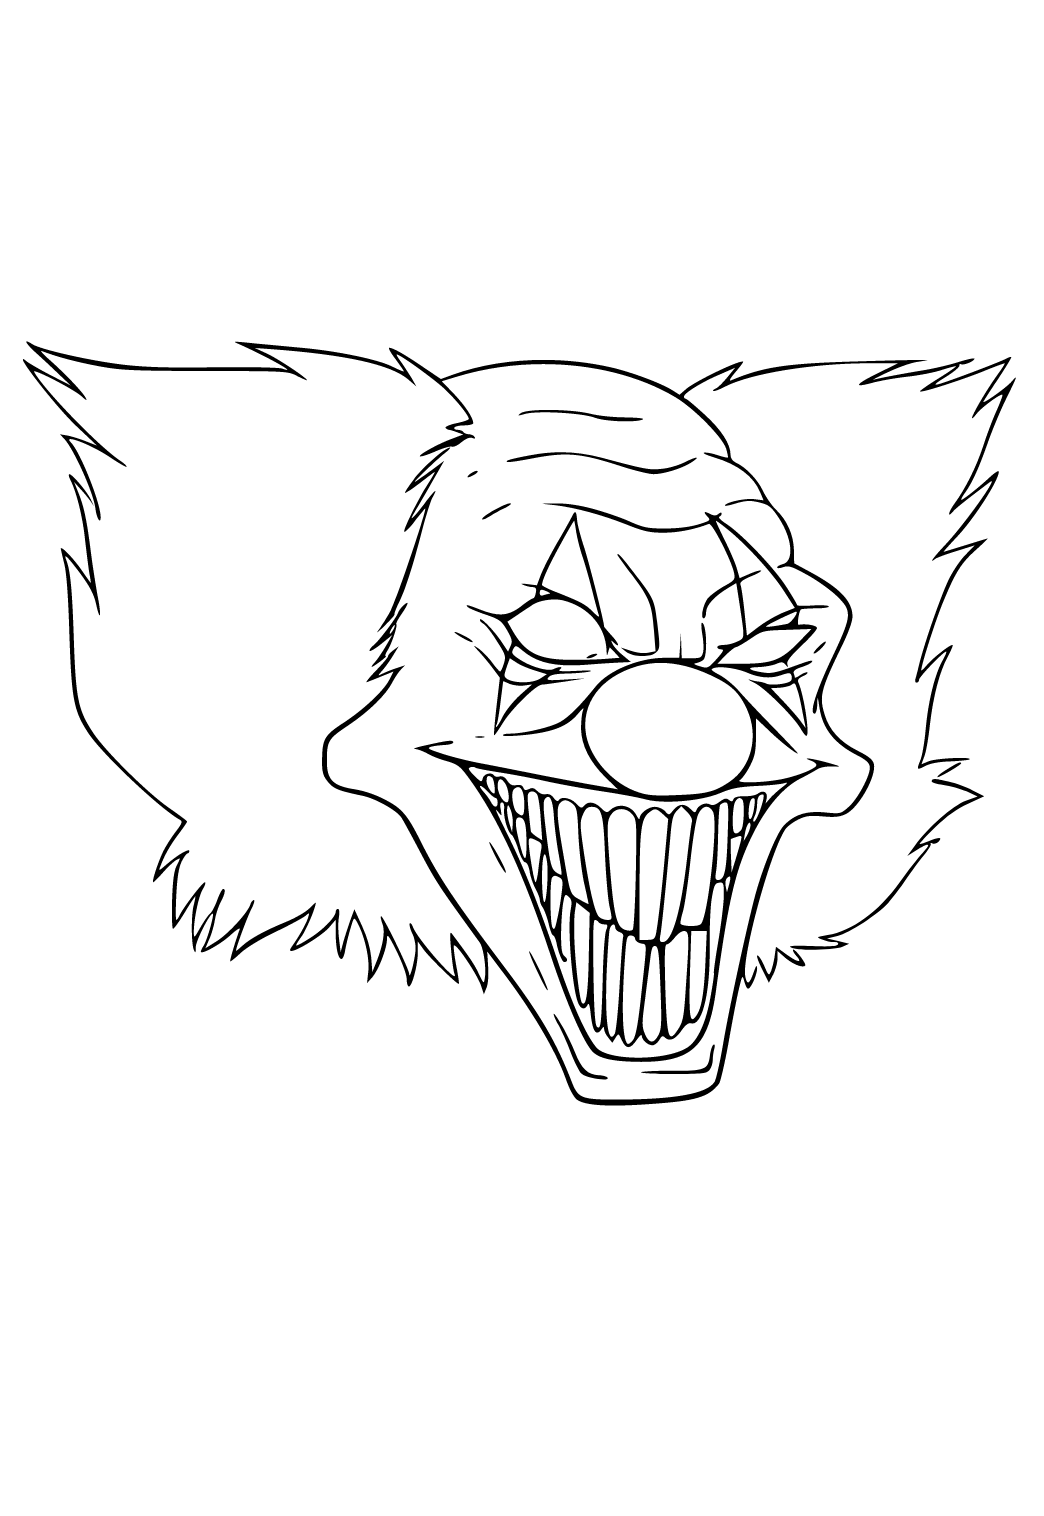 Free printable pennywise smile coloring page for adults and kids